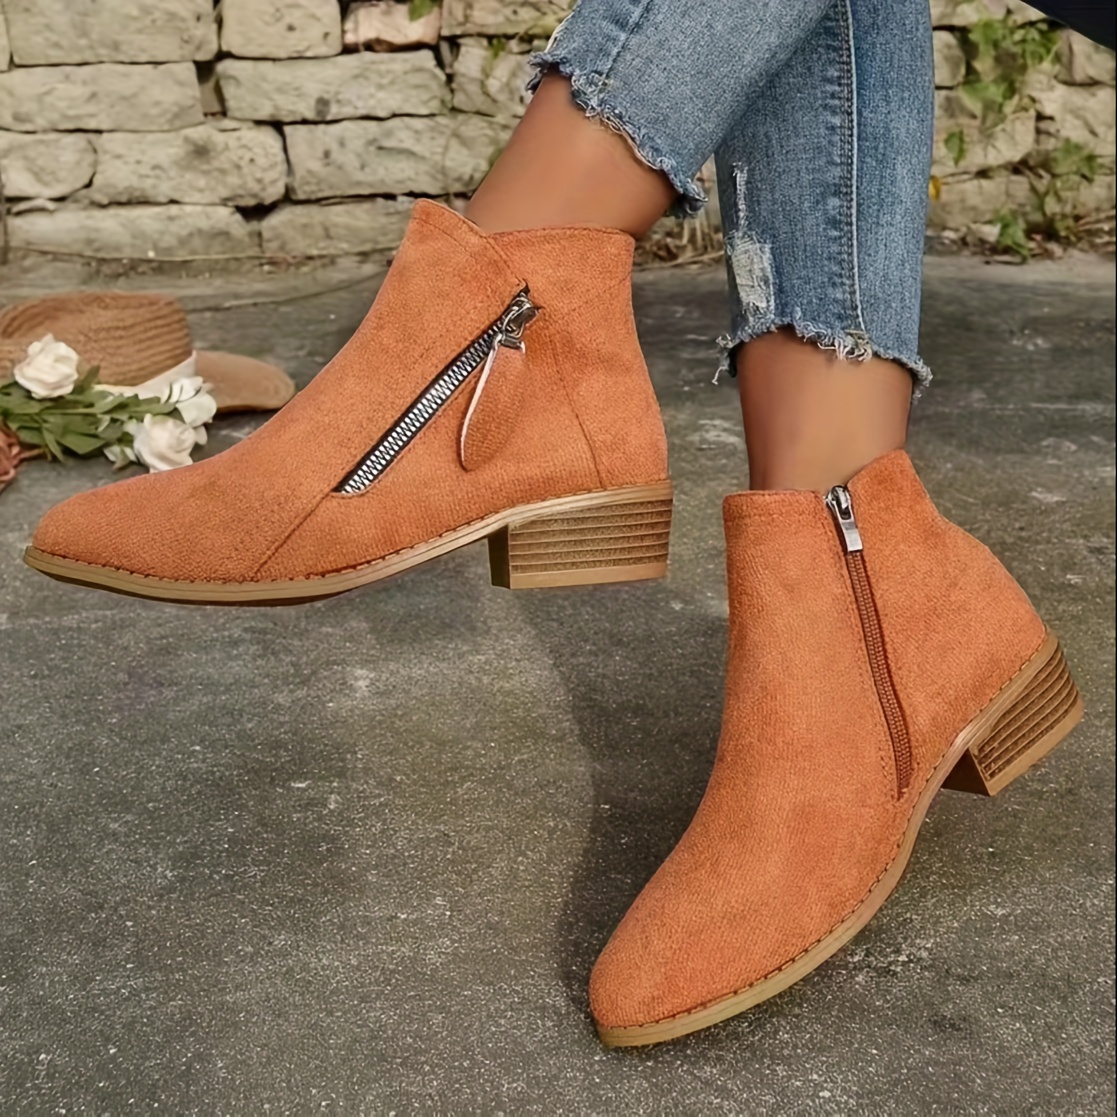 women s chunky low heeled ankle boots solid color side